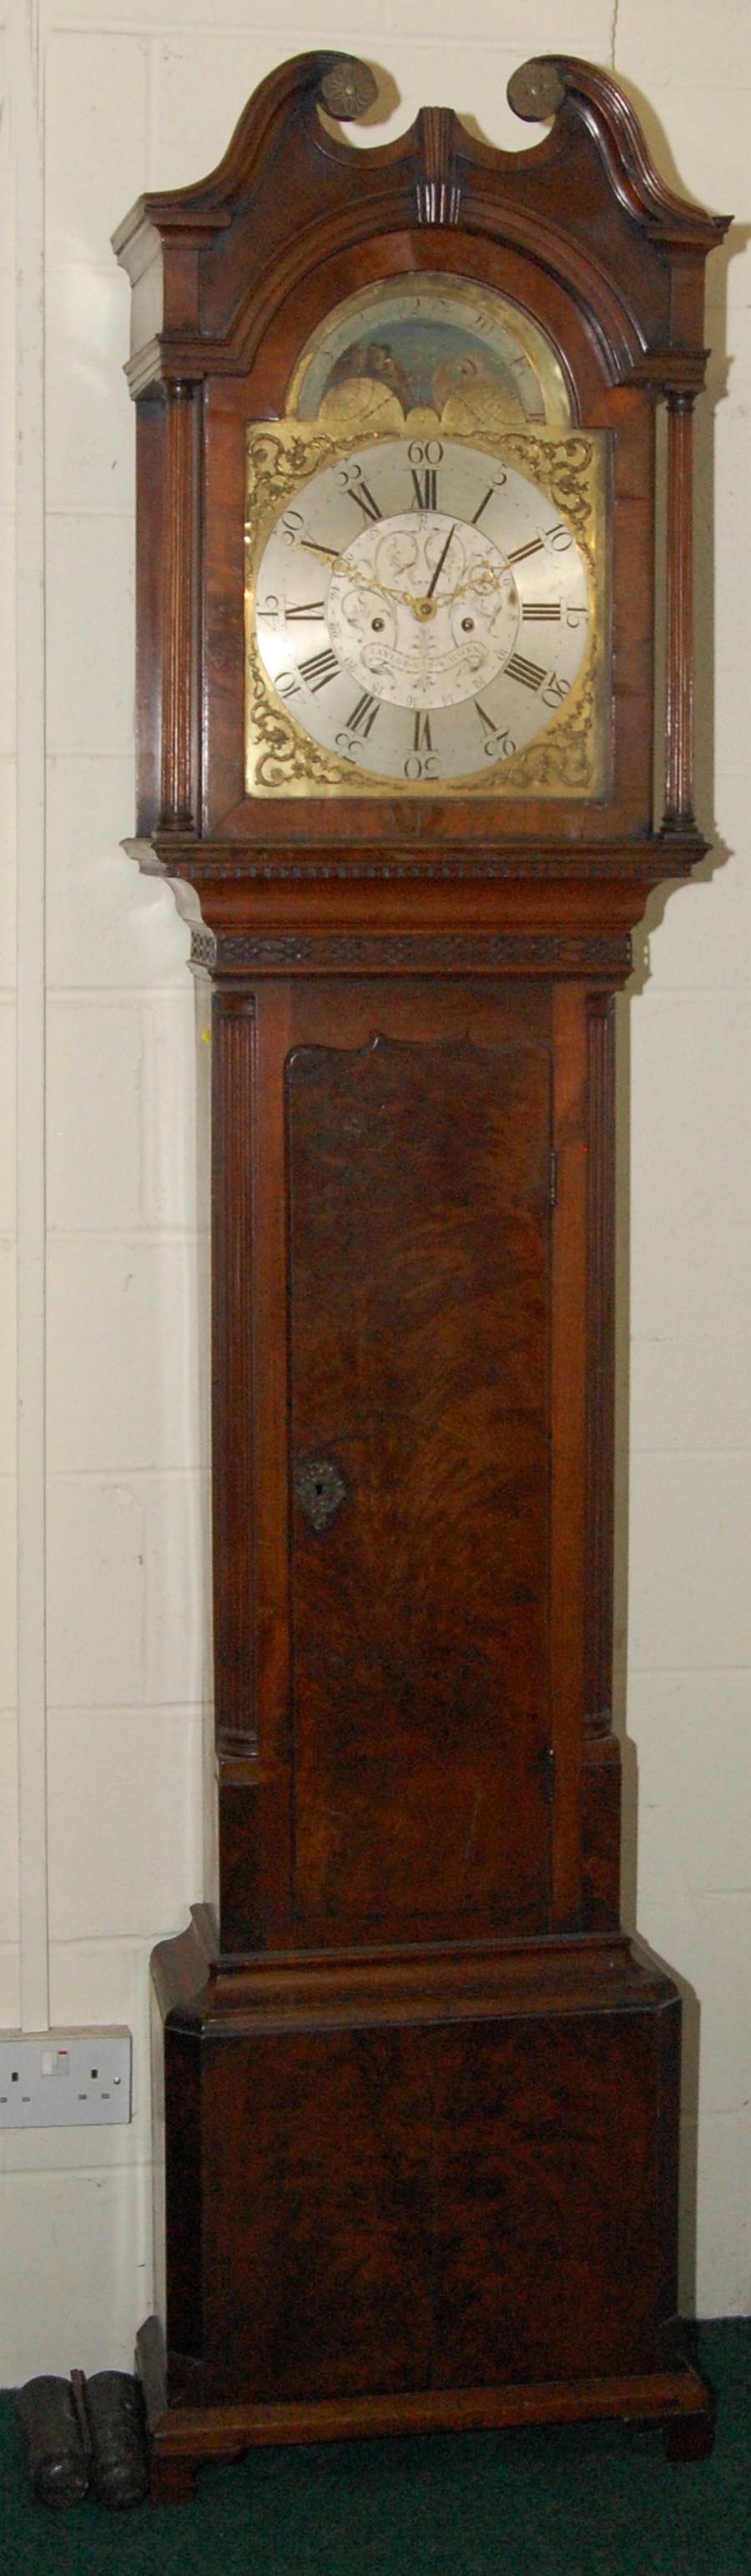 Eight day longcase clock by Taylor, K.S.